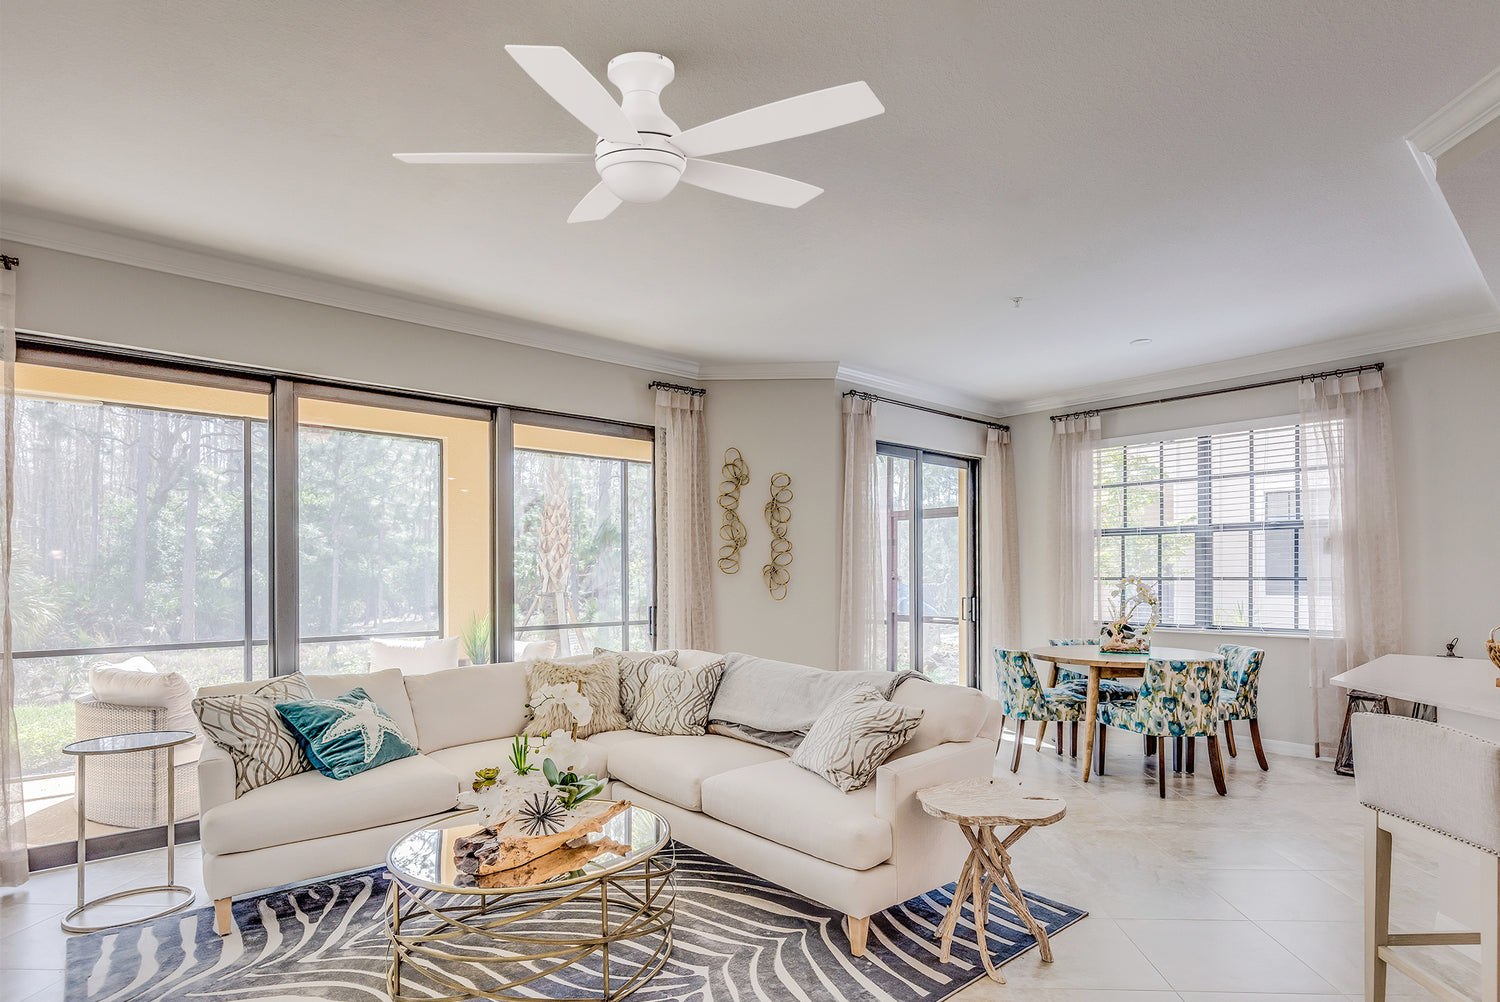 White low-profile modern ceiling fan with five abs blades in a elegant living room